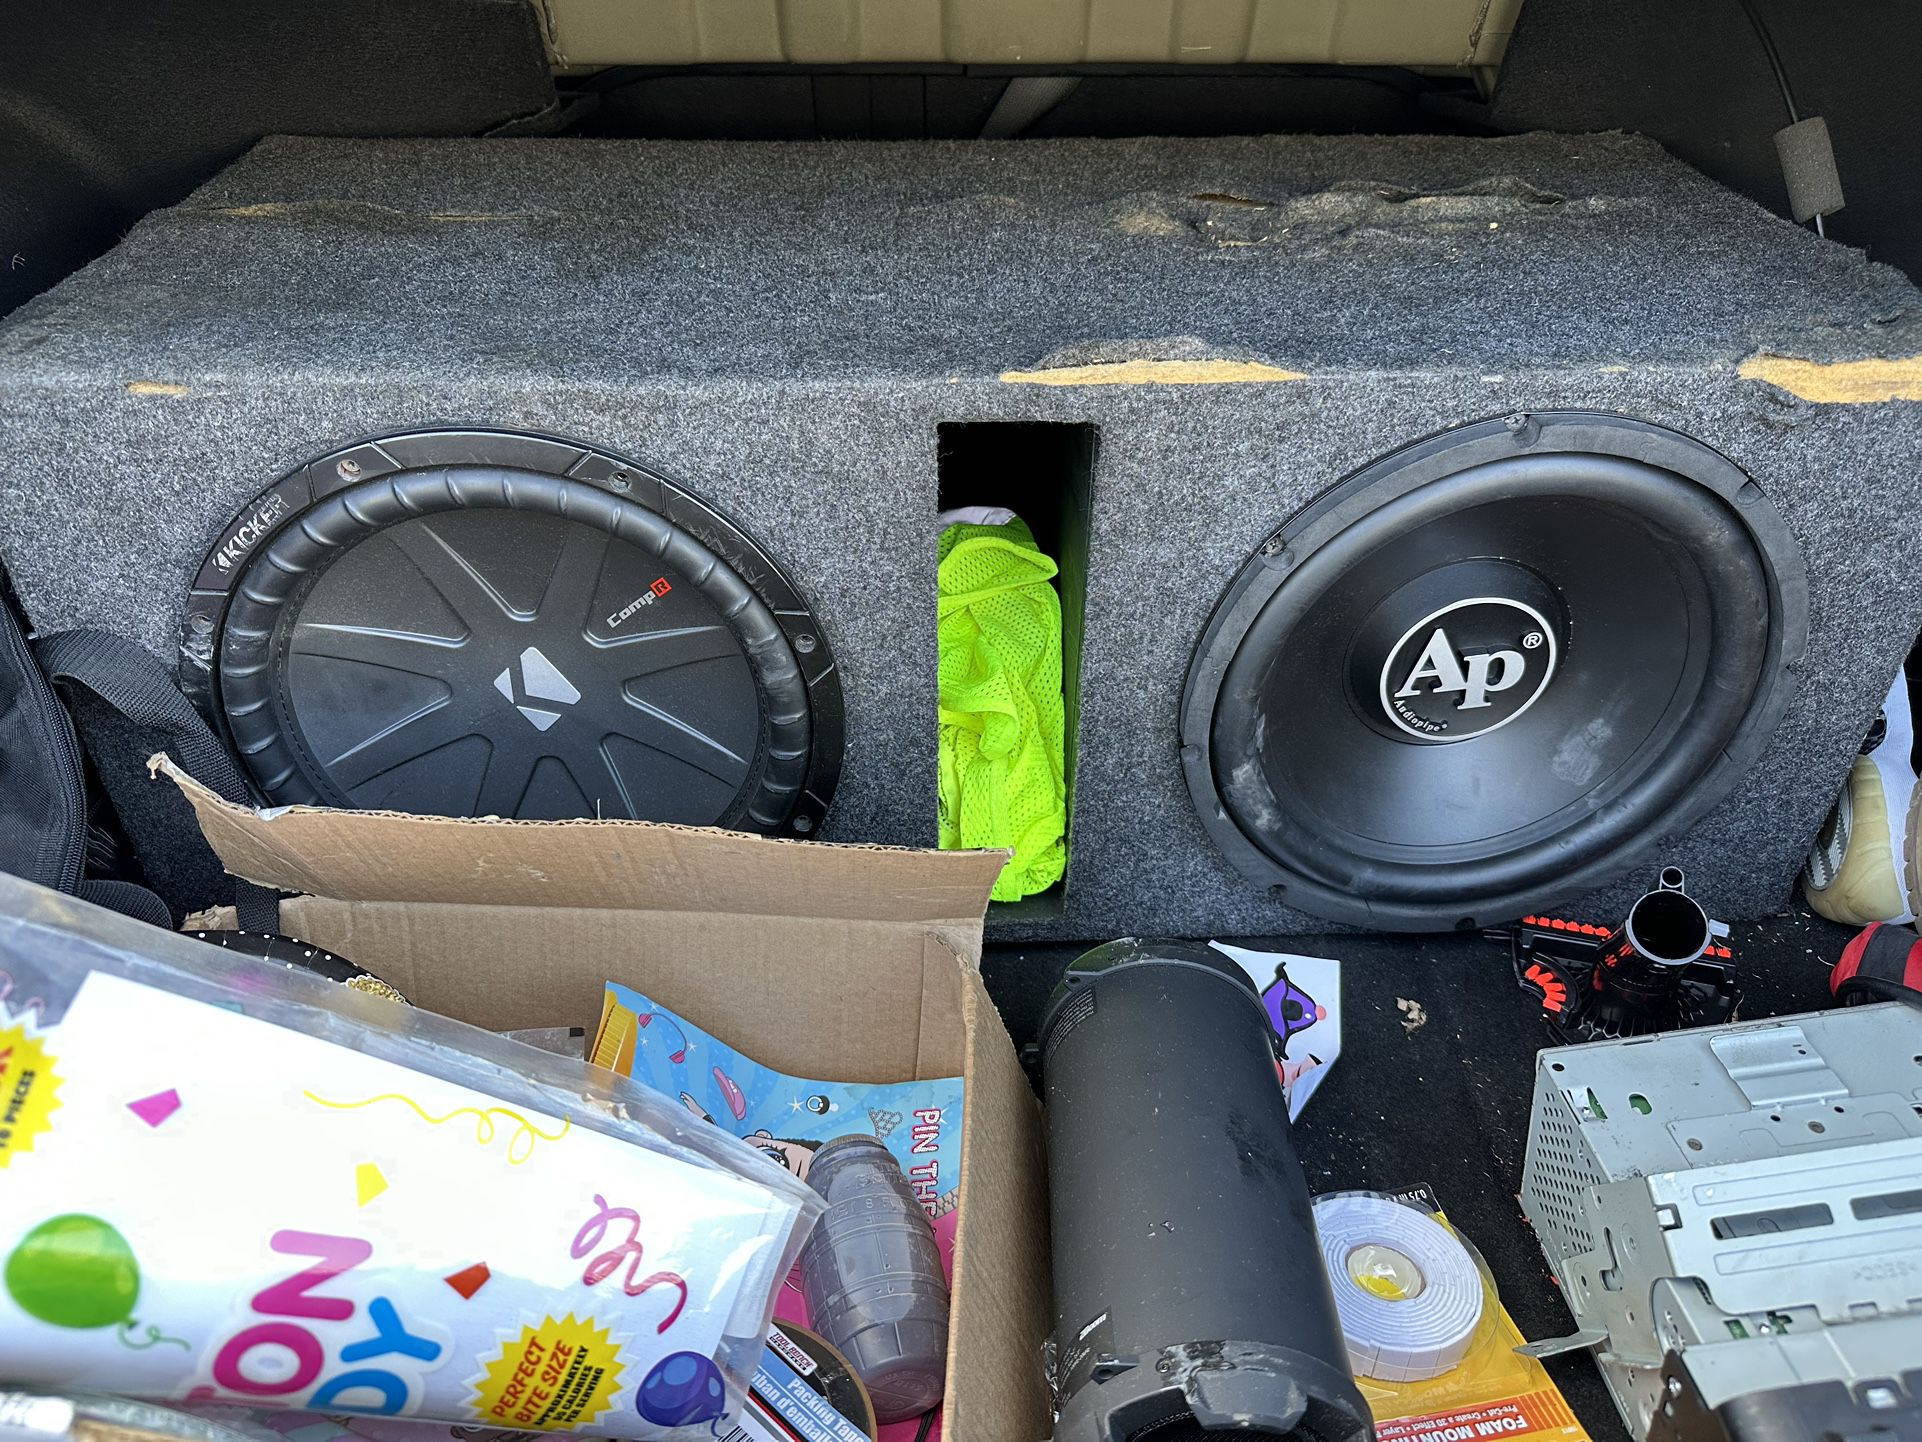 What Size Amp for 12 Inch Sub?